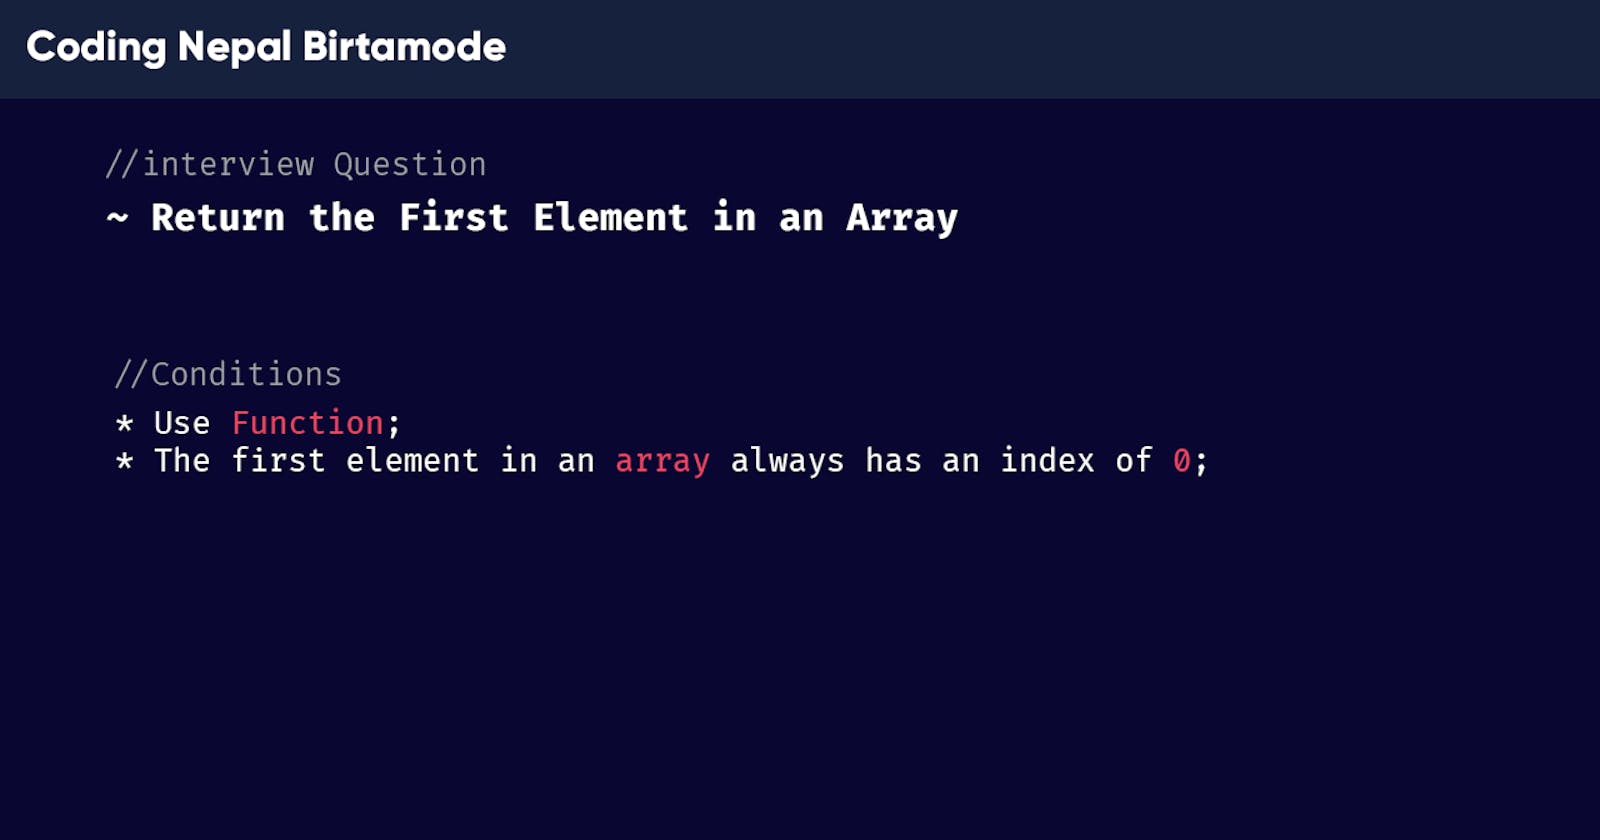 Return the First Element in an Array